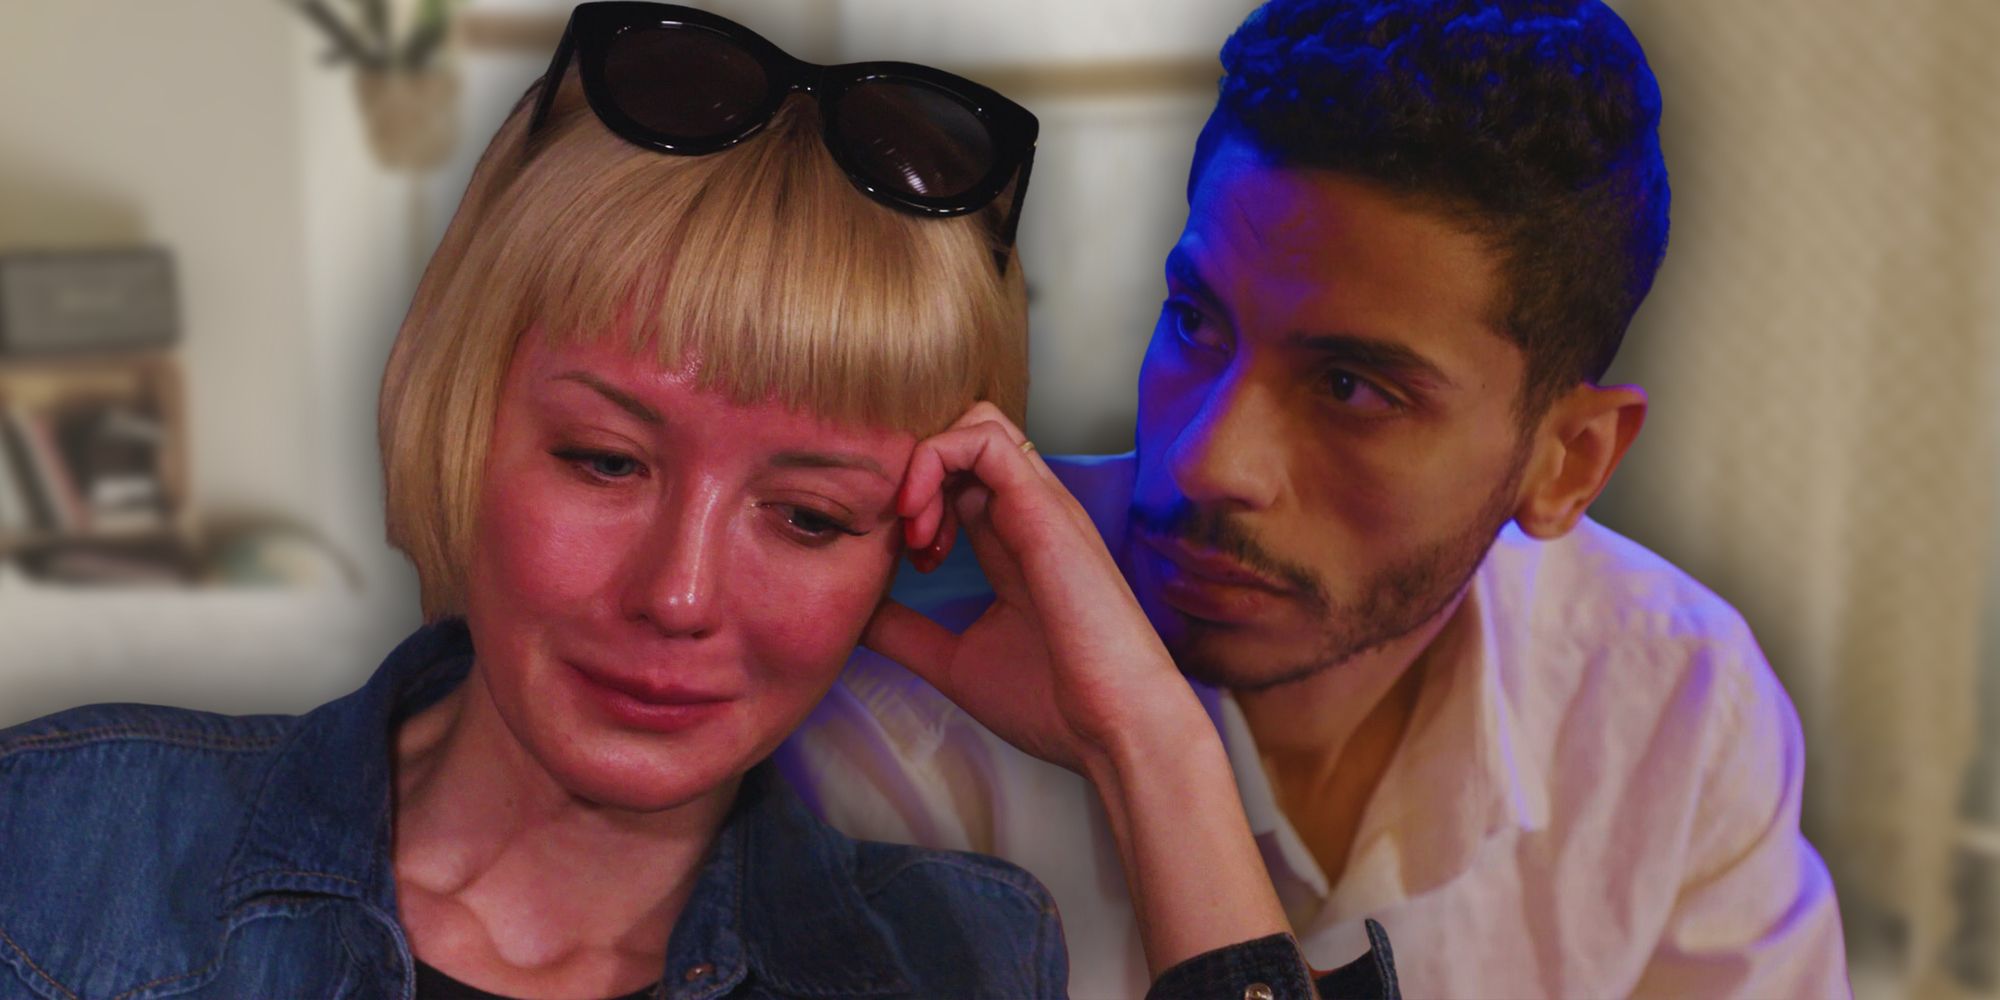  Nicole Sherbiny and Mahmoud El sherbiny from 90 Day Fiance montage serious expressions